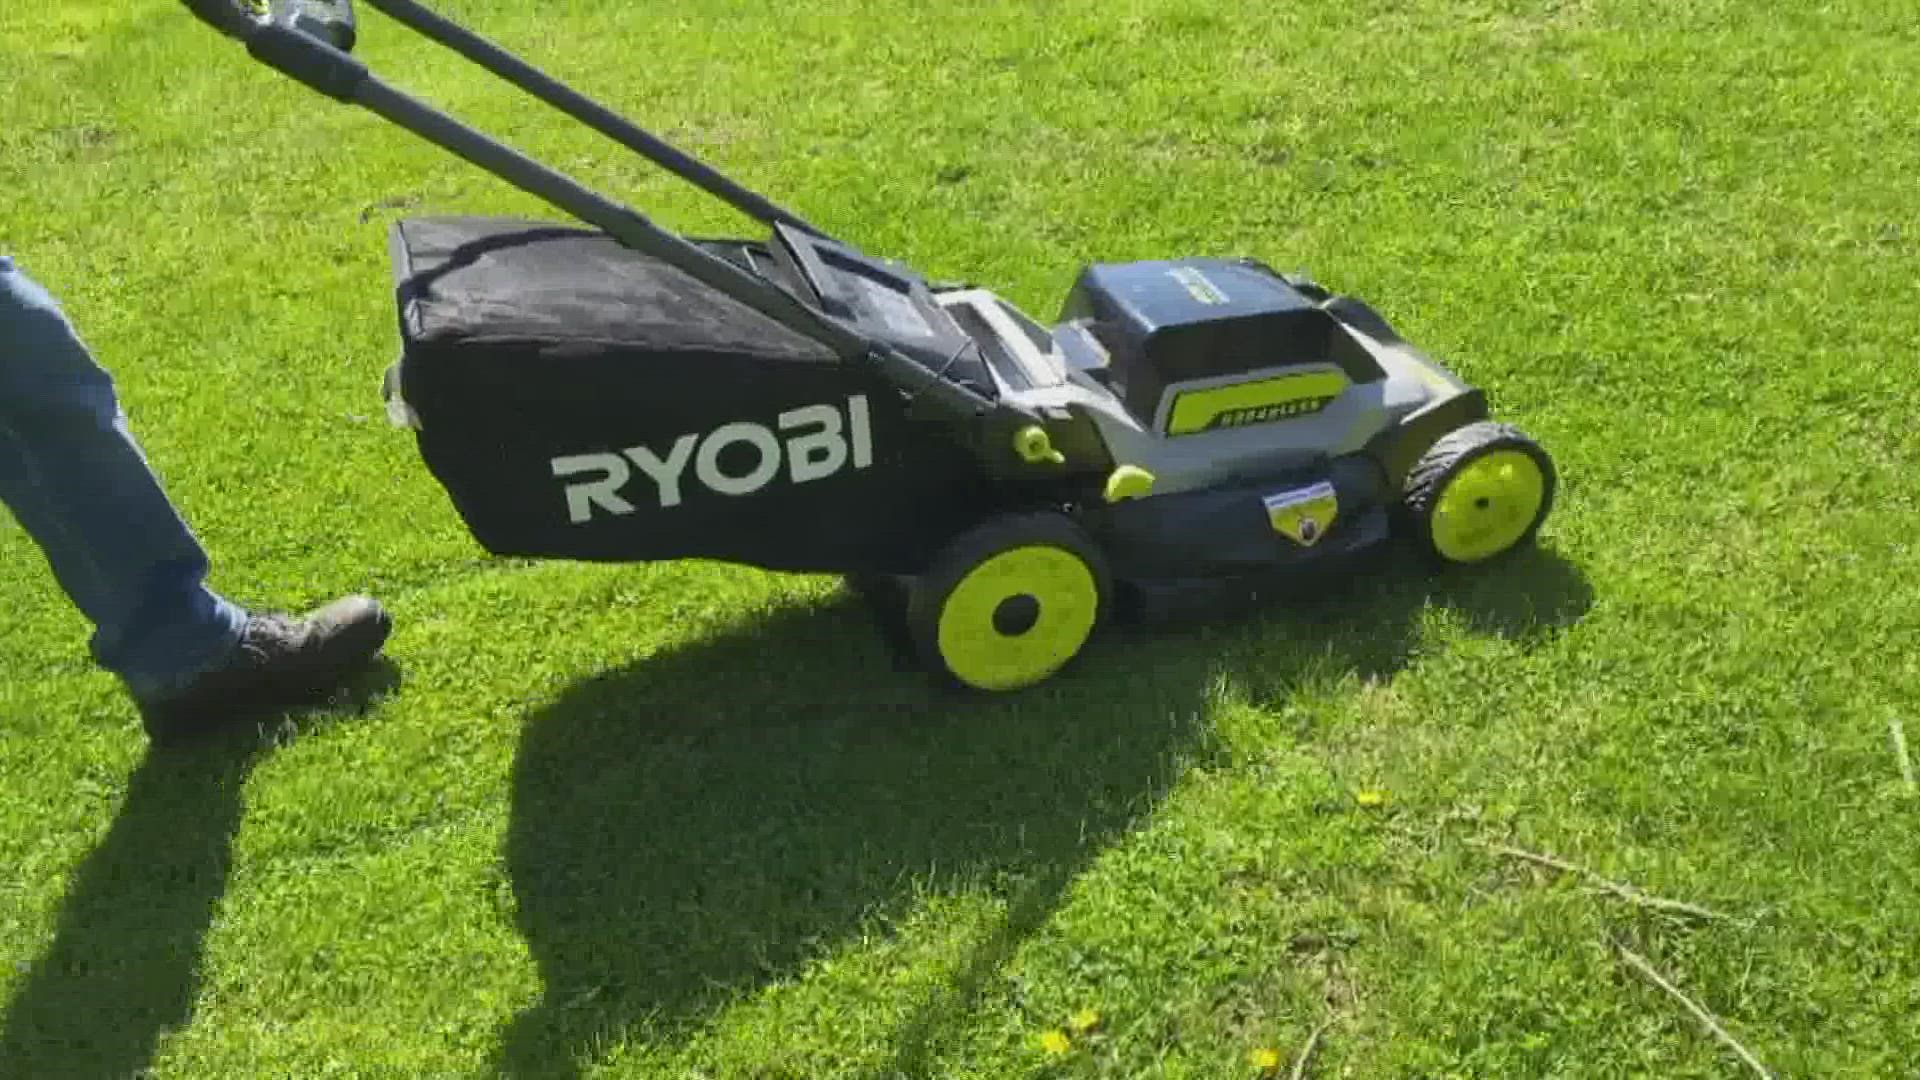 Consumer Reports tested battery-powered mowers for the 2022 season